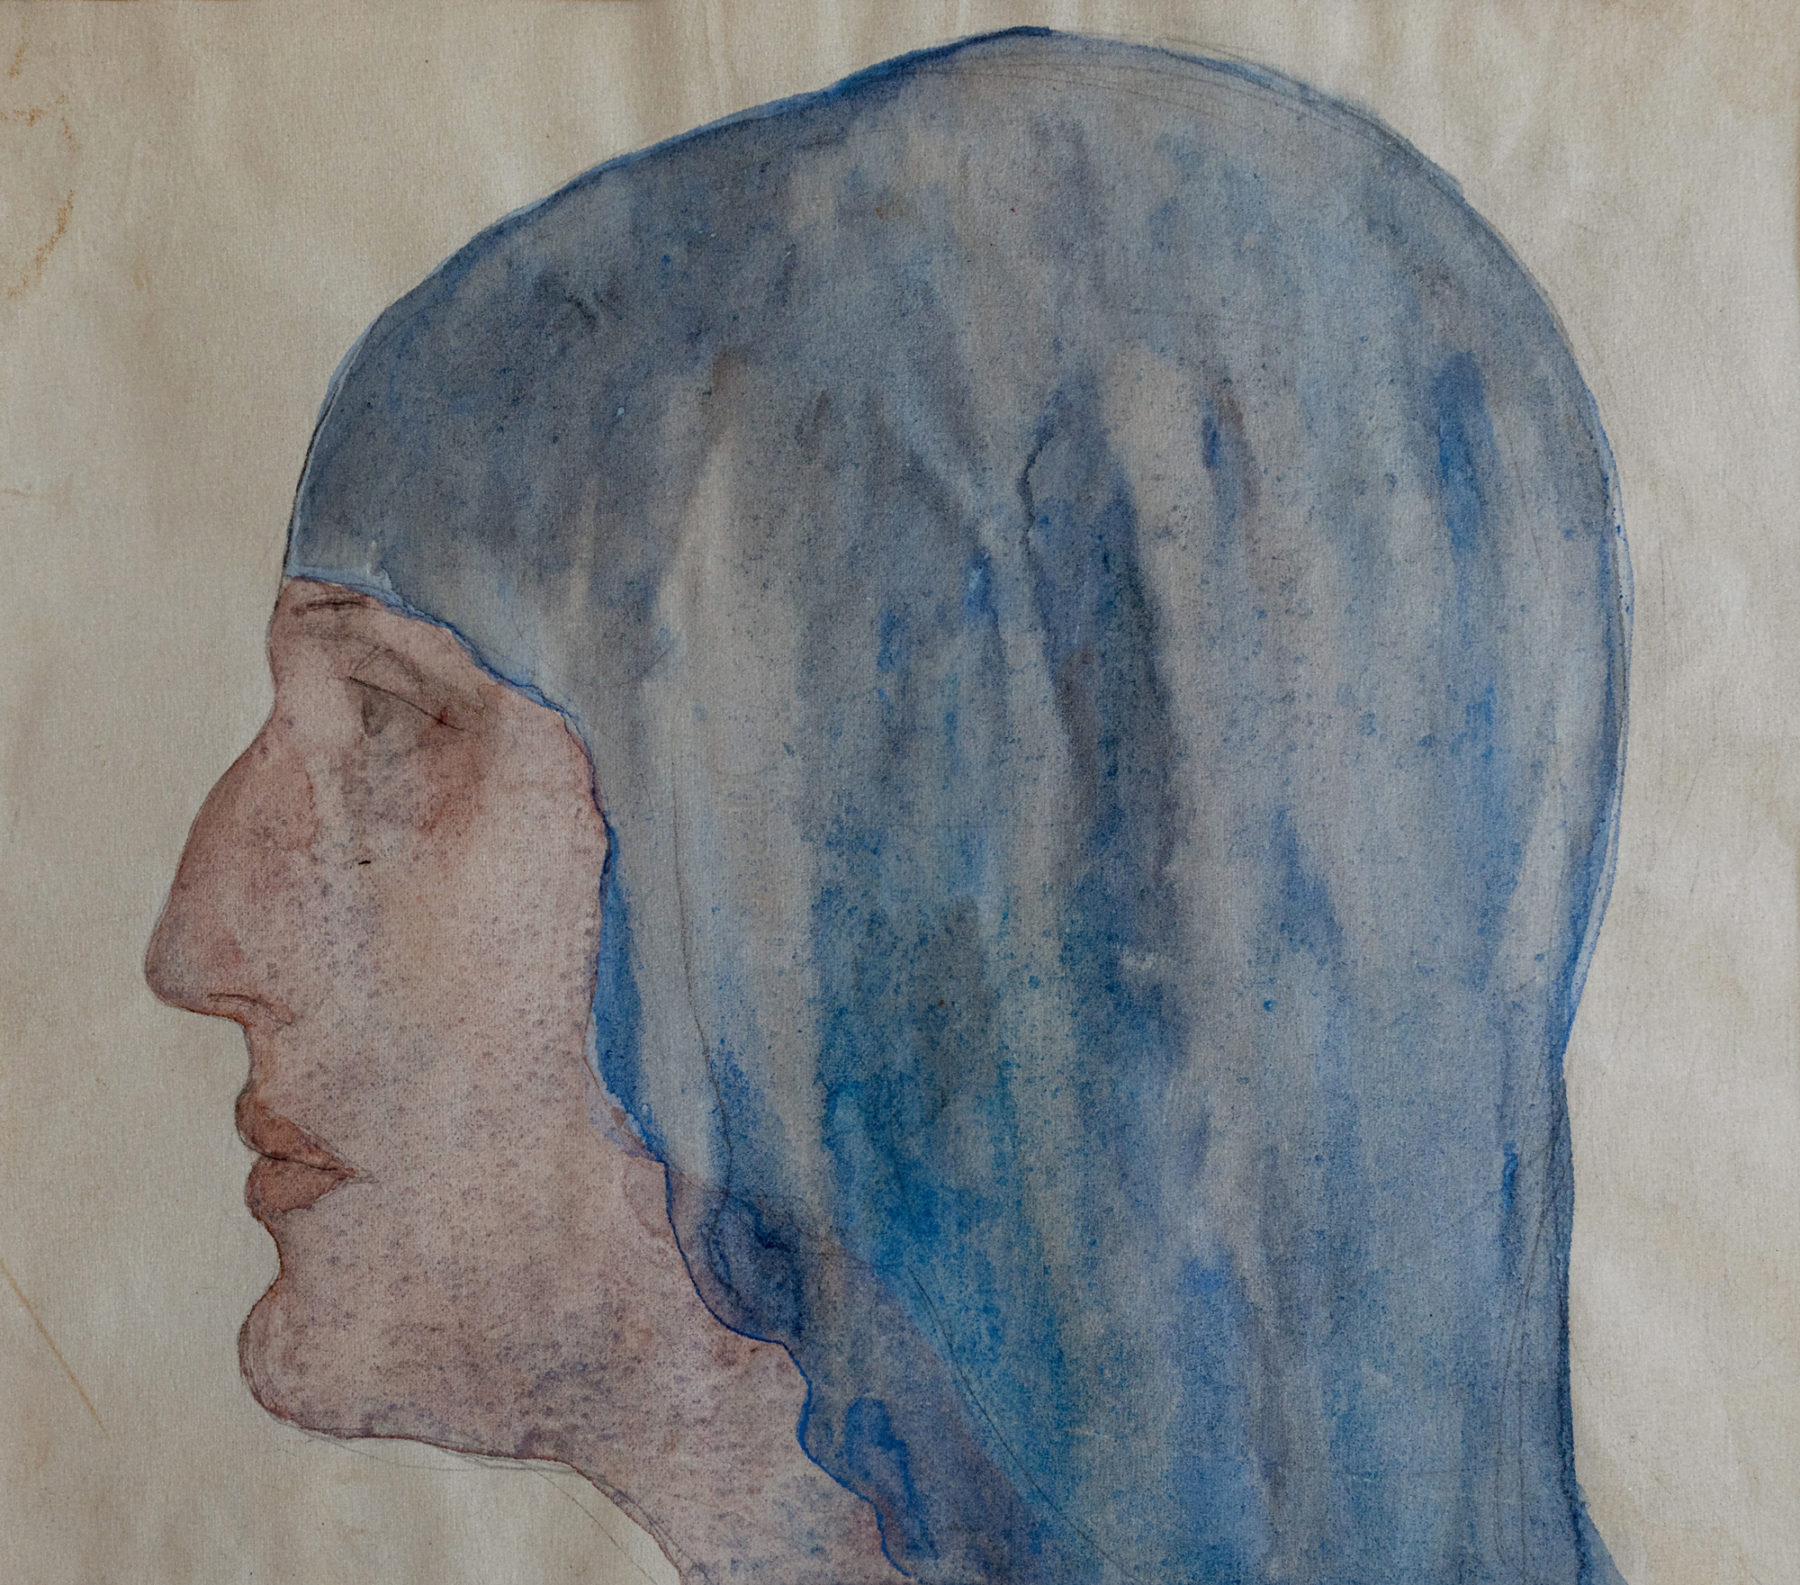 Kahlil Gibran, "A Woman with a Blue Veil," 1916. Watercolor, 8 1/2 x 10 inches (21.5 x 25.3 cm). Collection of the Gibran Khalil Gibran Museum, Courtesy of the Gibran National Committee